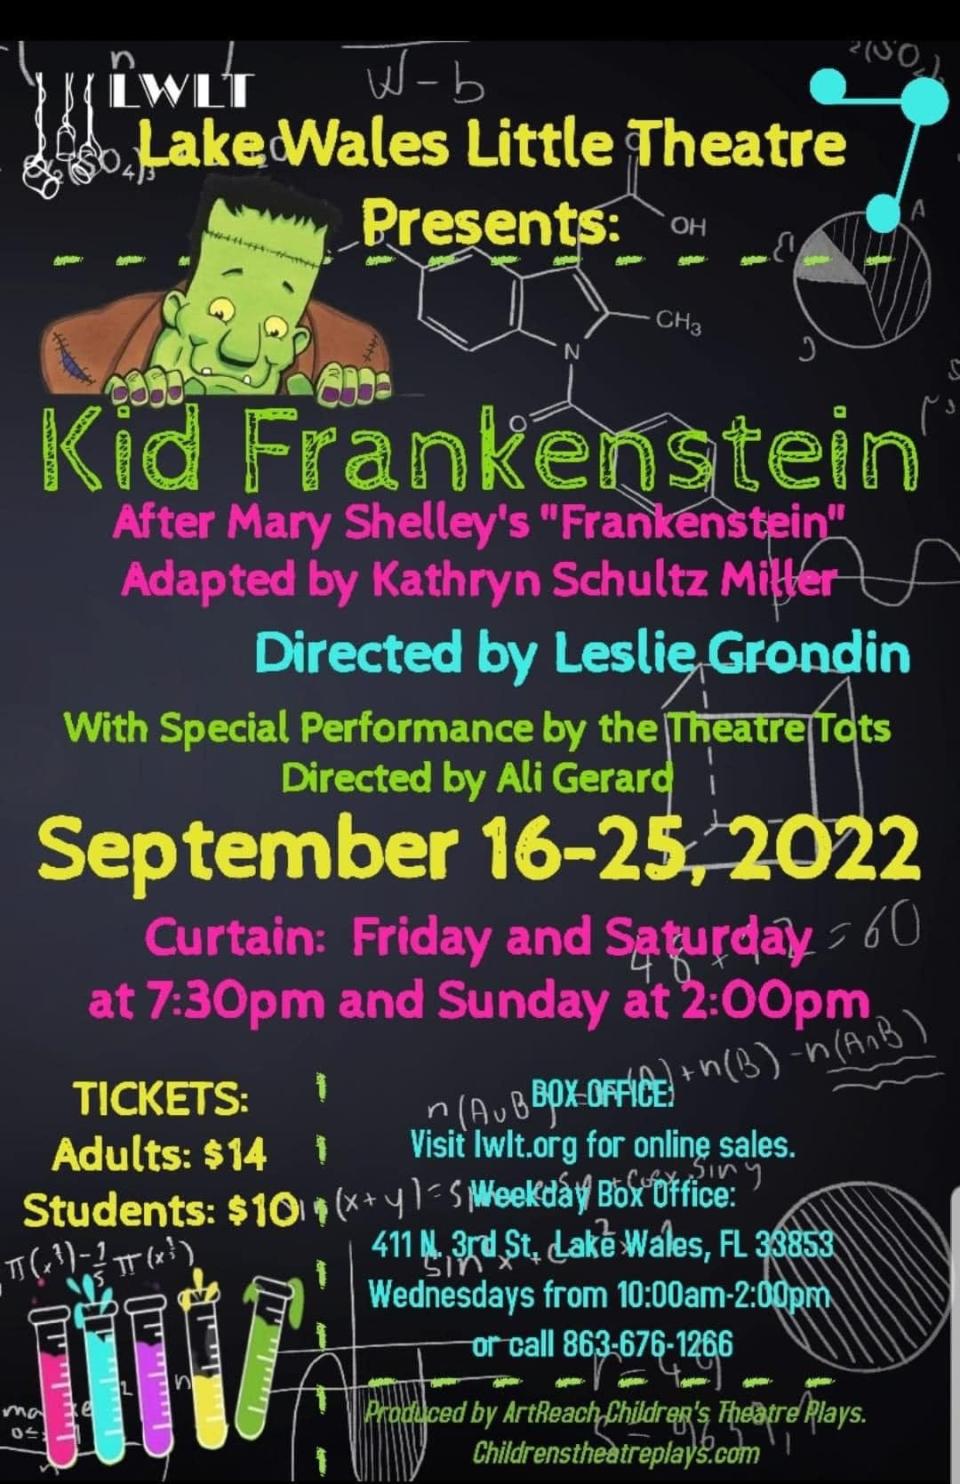 "KID FRANKENSTEIN:" 7:30 p.m. Friday and Saturday, 2 p.m. Sunday, Sept. 16-25, Lake Wales Little Theater.